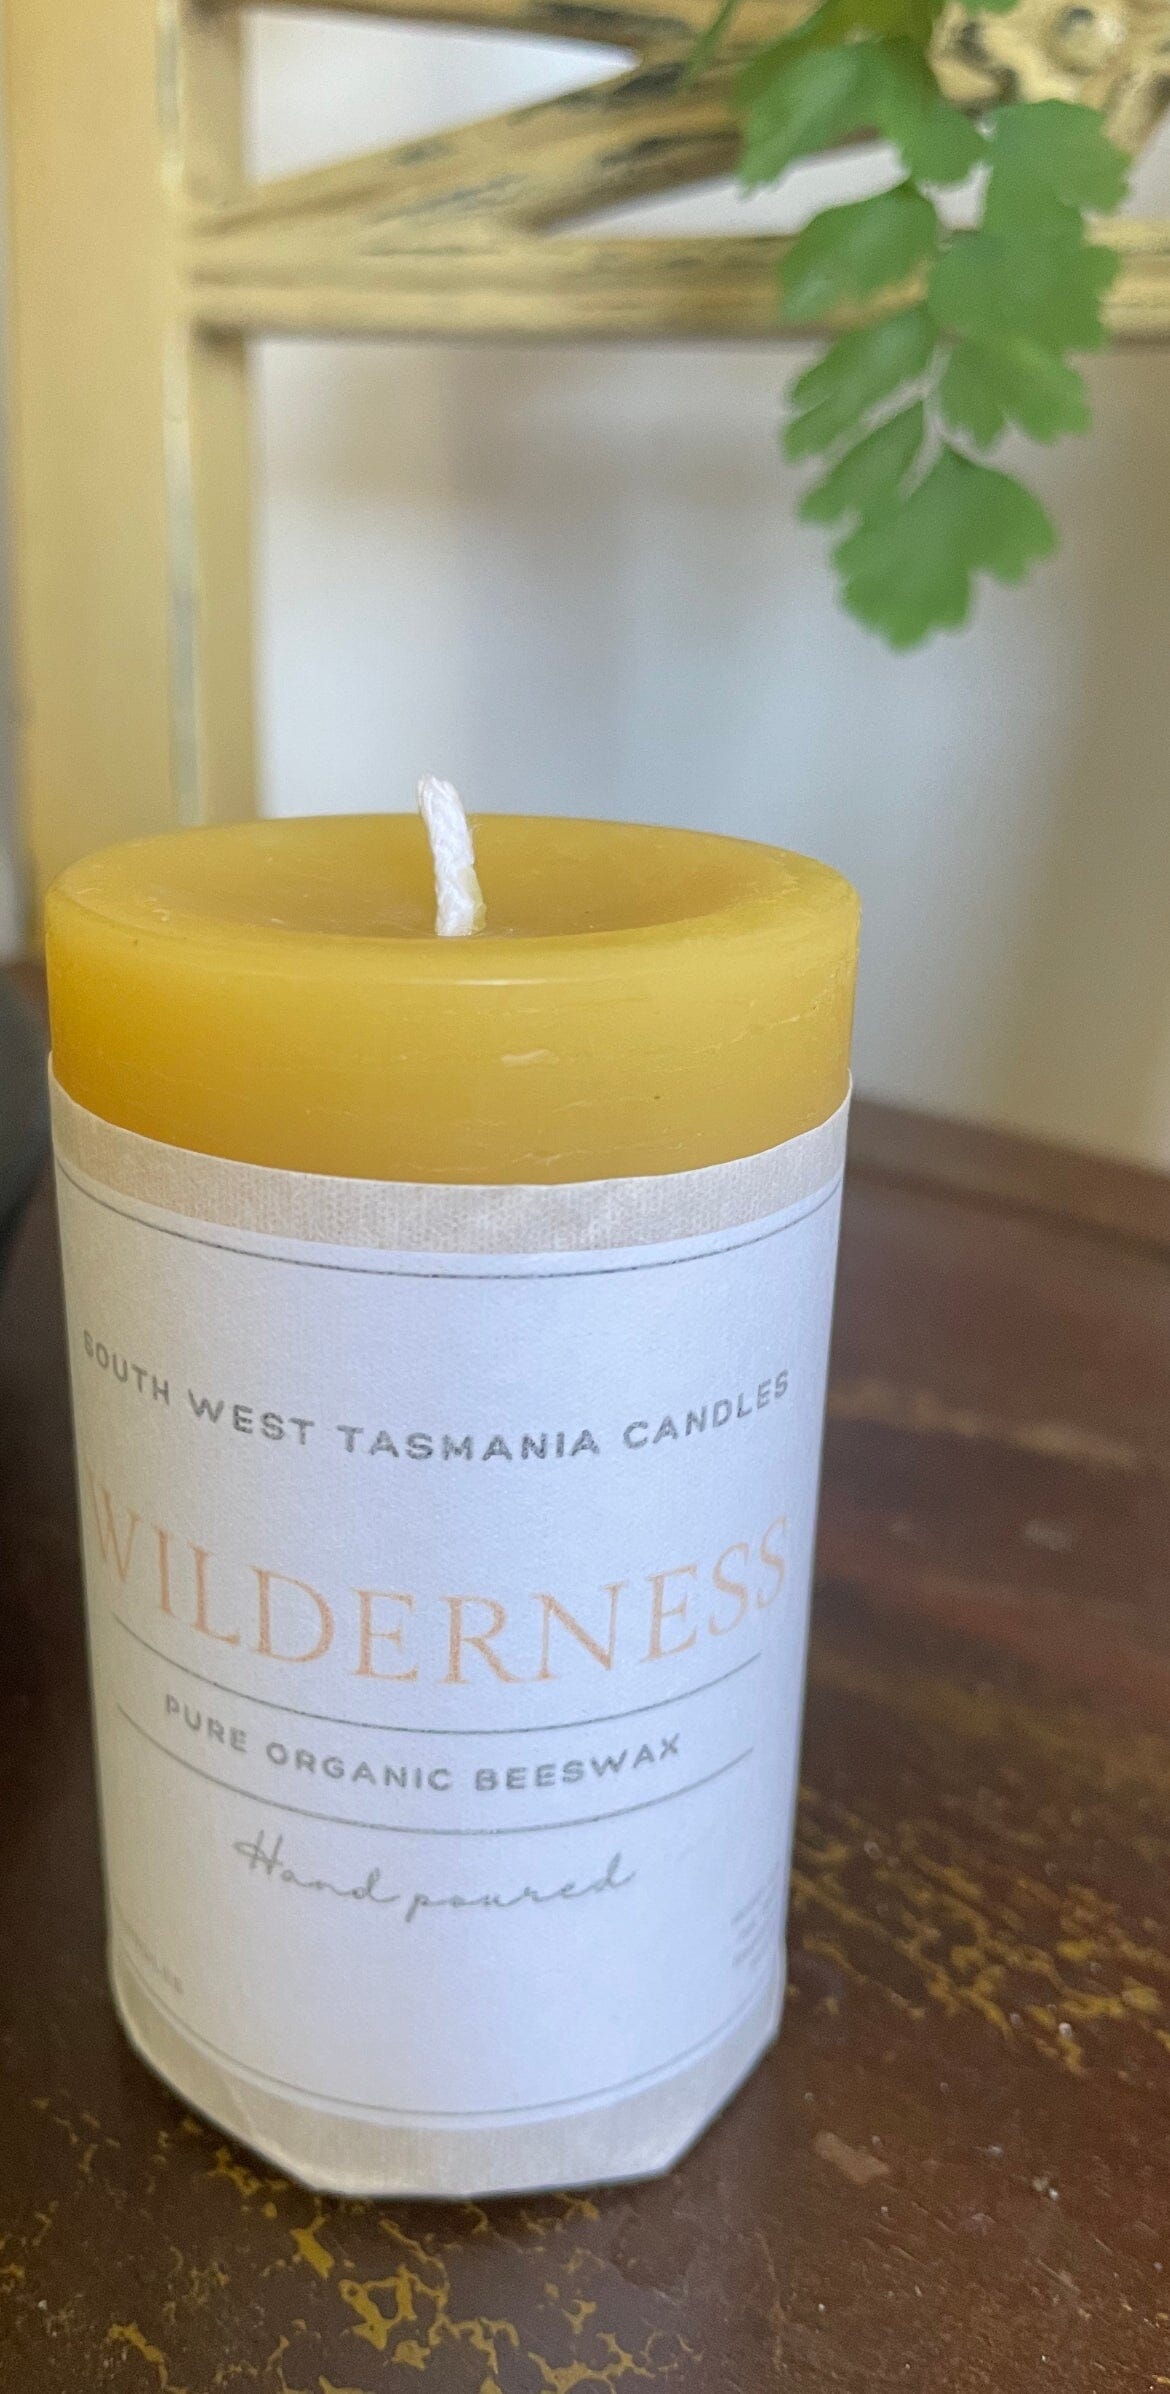 Wilderness Beeswax Candles - Tasmanian Candles The Spotted Quoll 